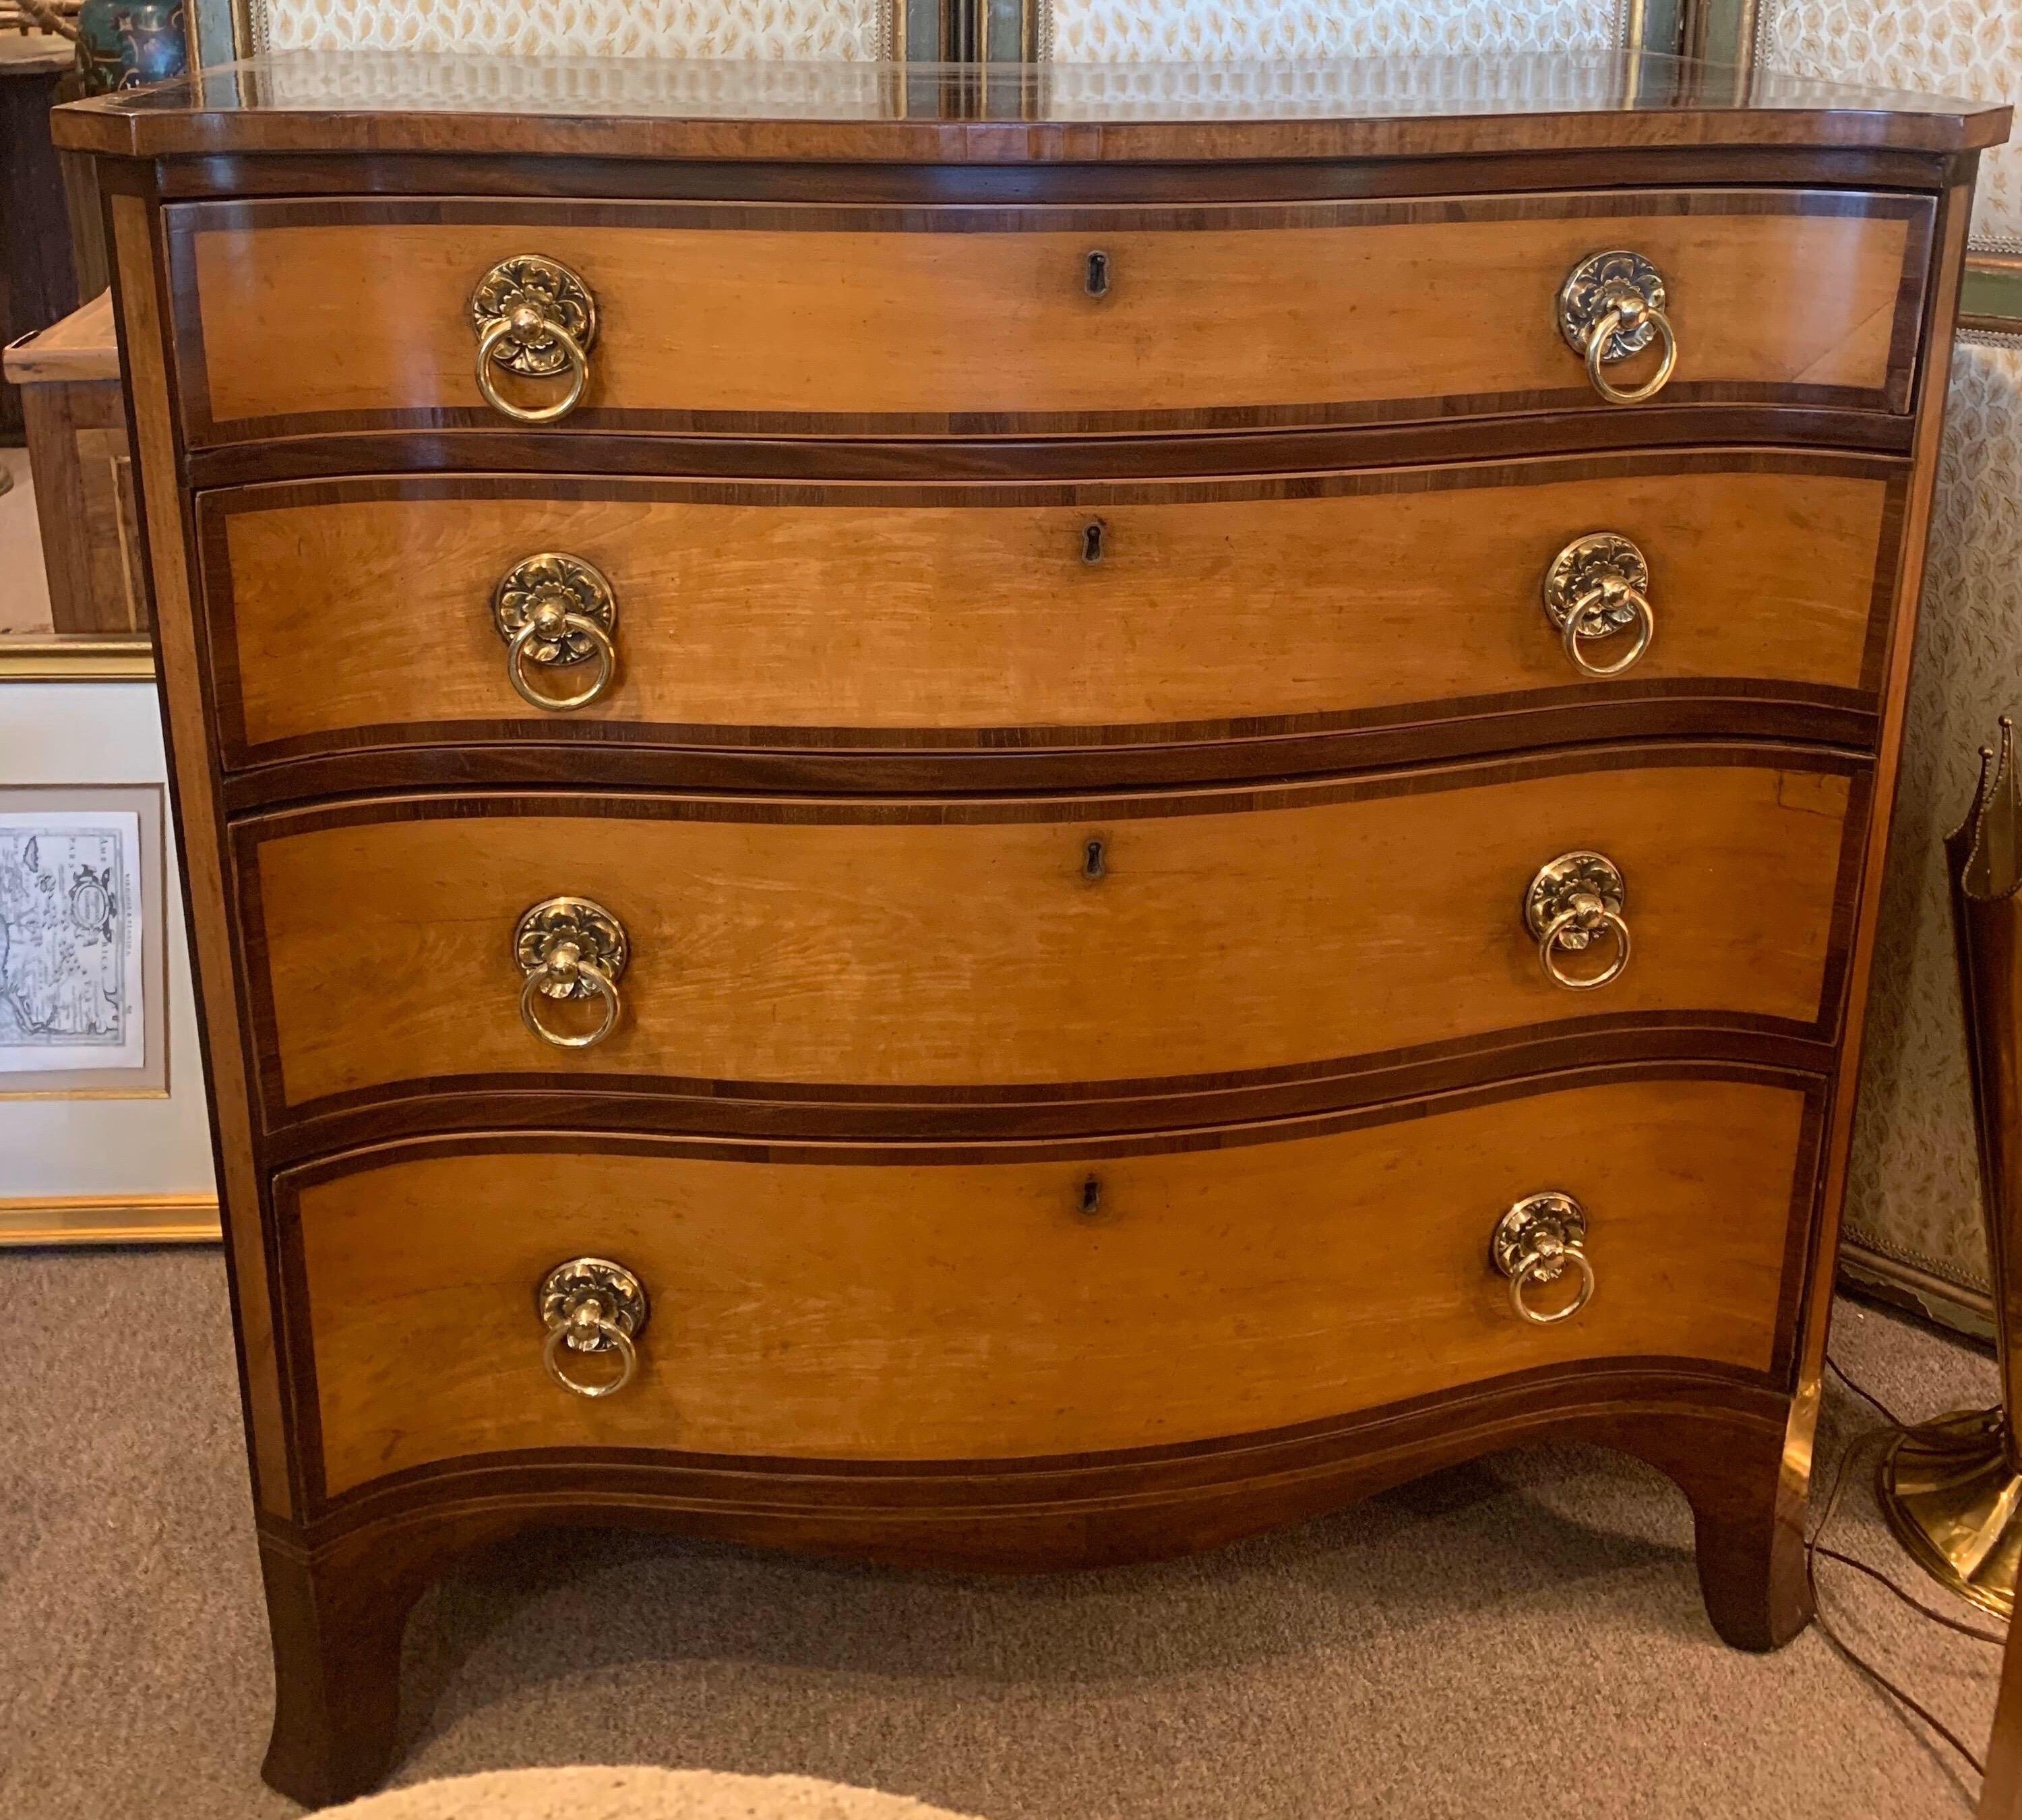 Incredibly handsome 18th century mahogany and maple serpentine chest later retailed by renown London cabinetmakers and antiques dealers, Edwards and Roberts. Gorgeous crotch mahogany and English maple used on this chest with 4 graduated drawers and